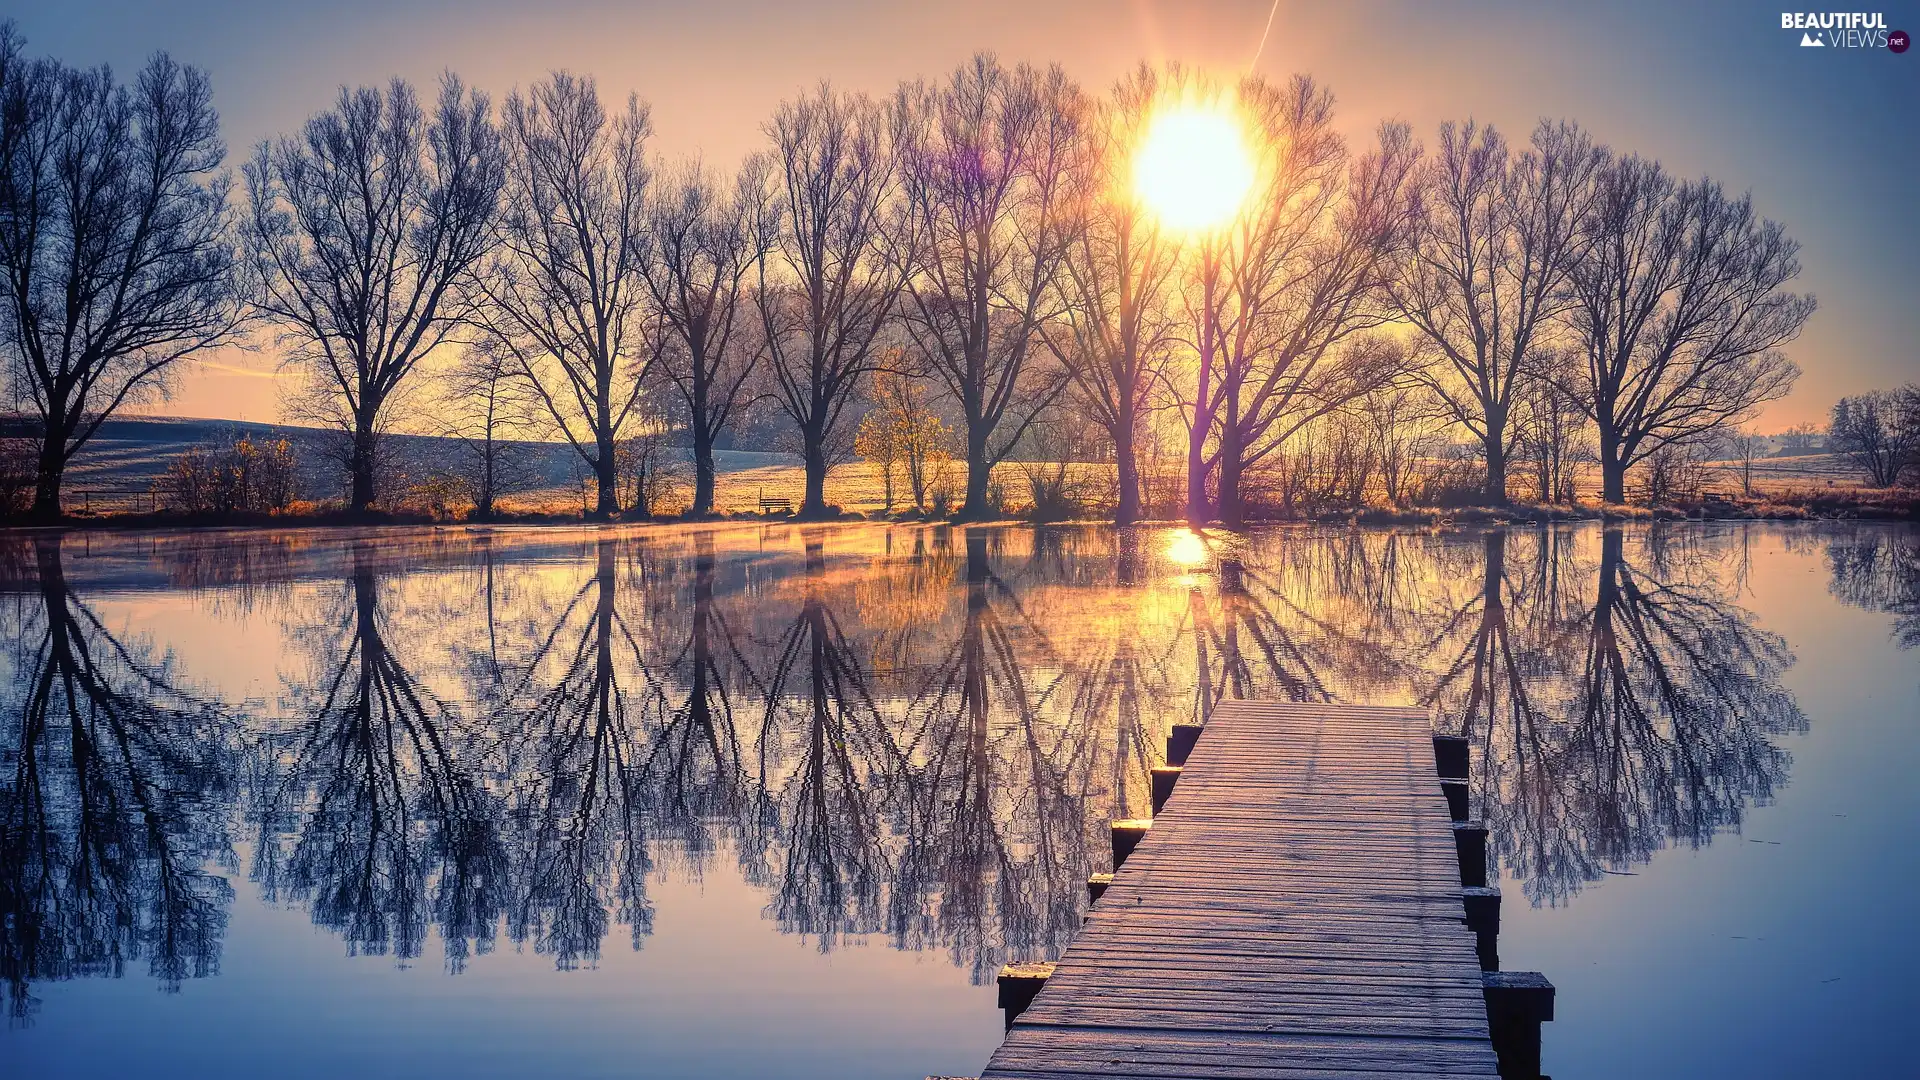 trees, lake, Platform, Great Sunsets, viewes, reflection